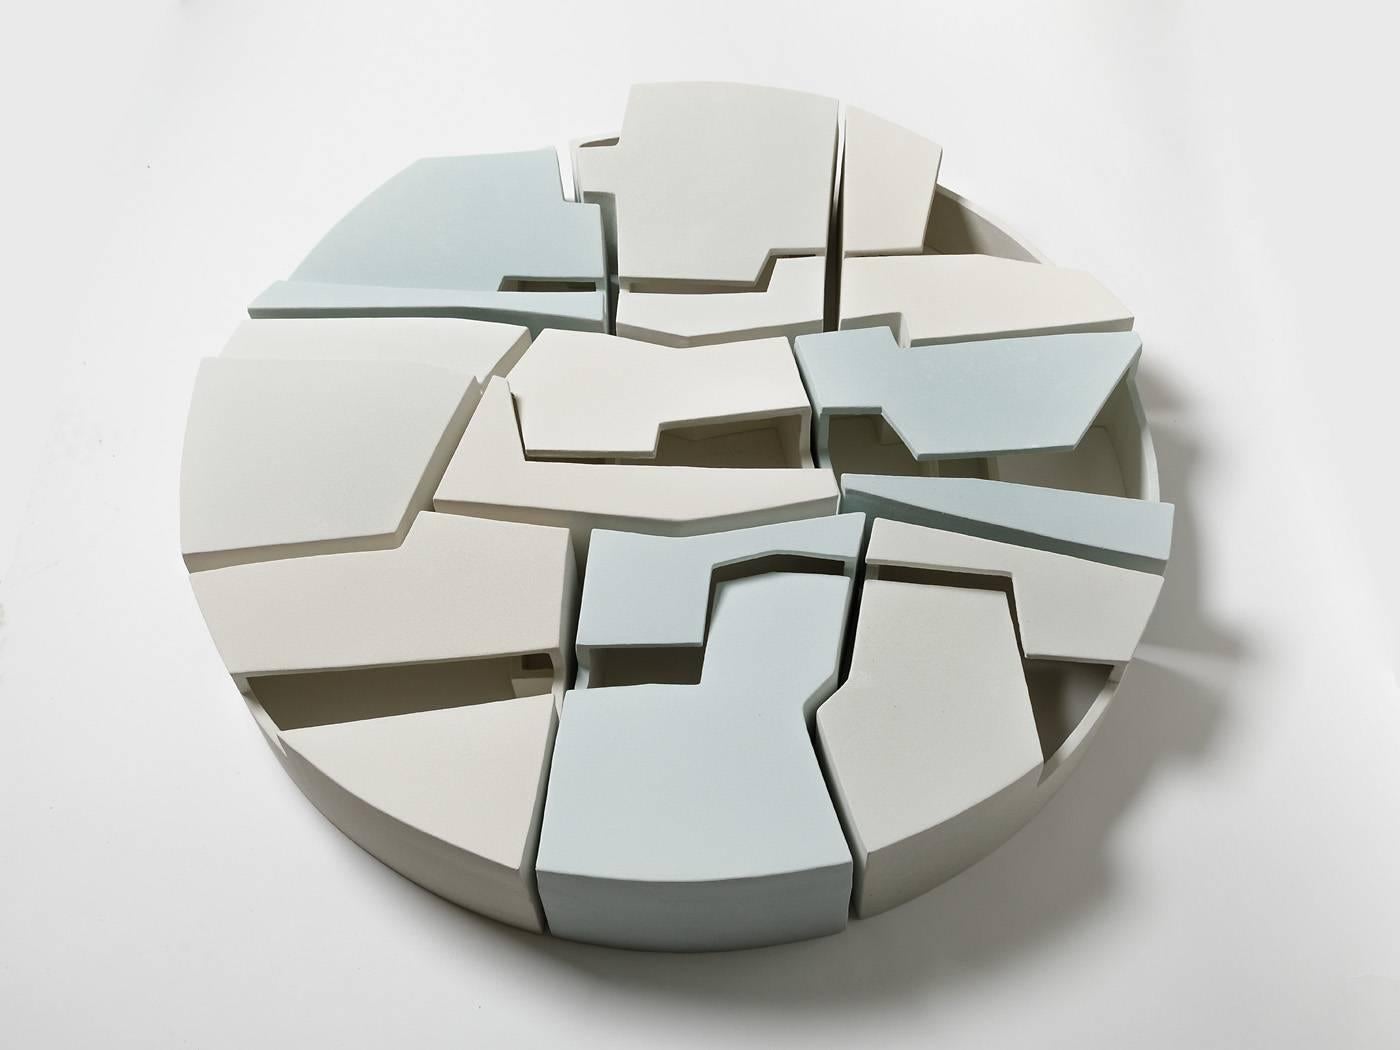 French Important Wall Ceramic Sculpture by Denis Castaing, 2016